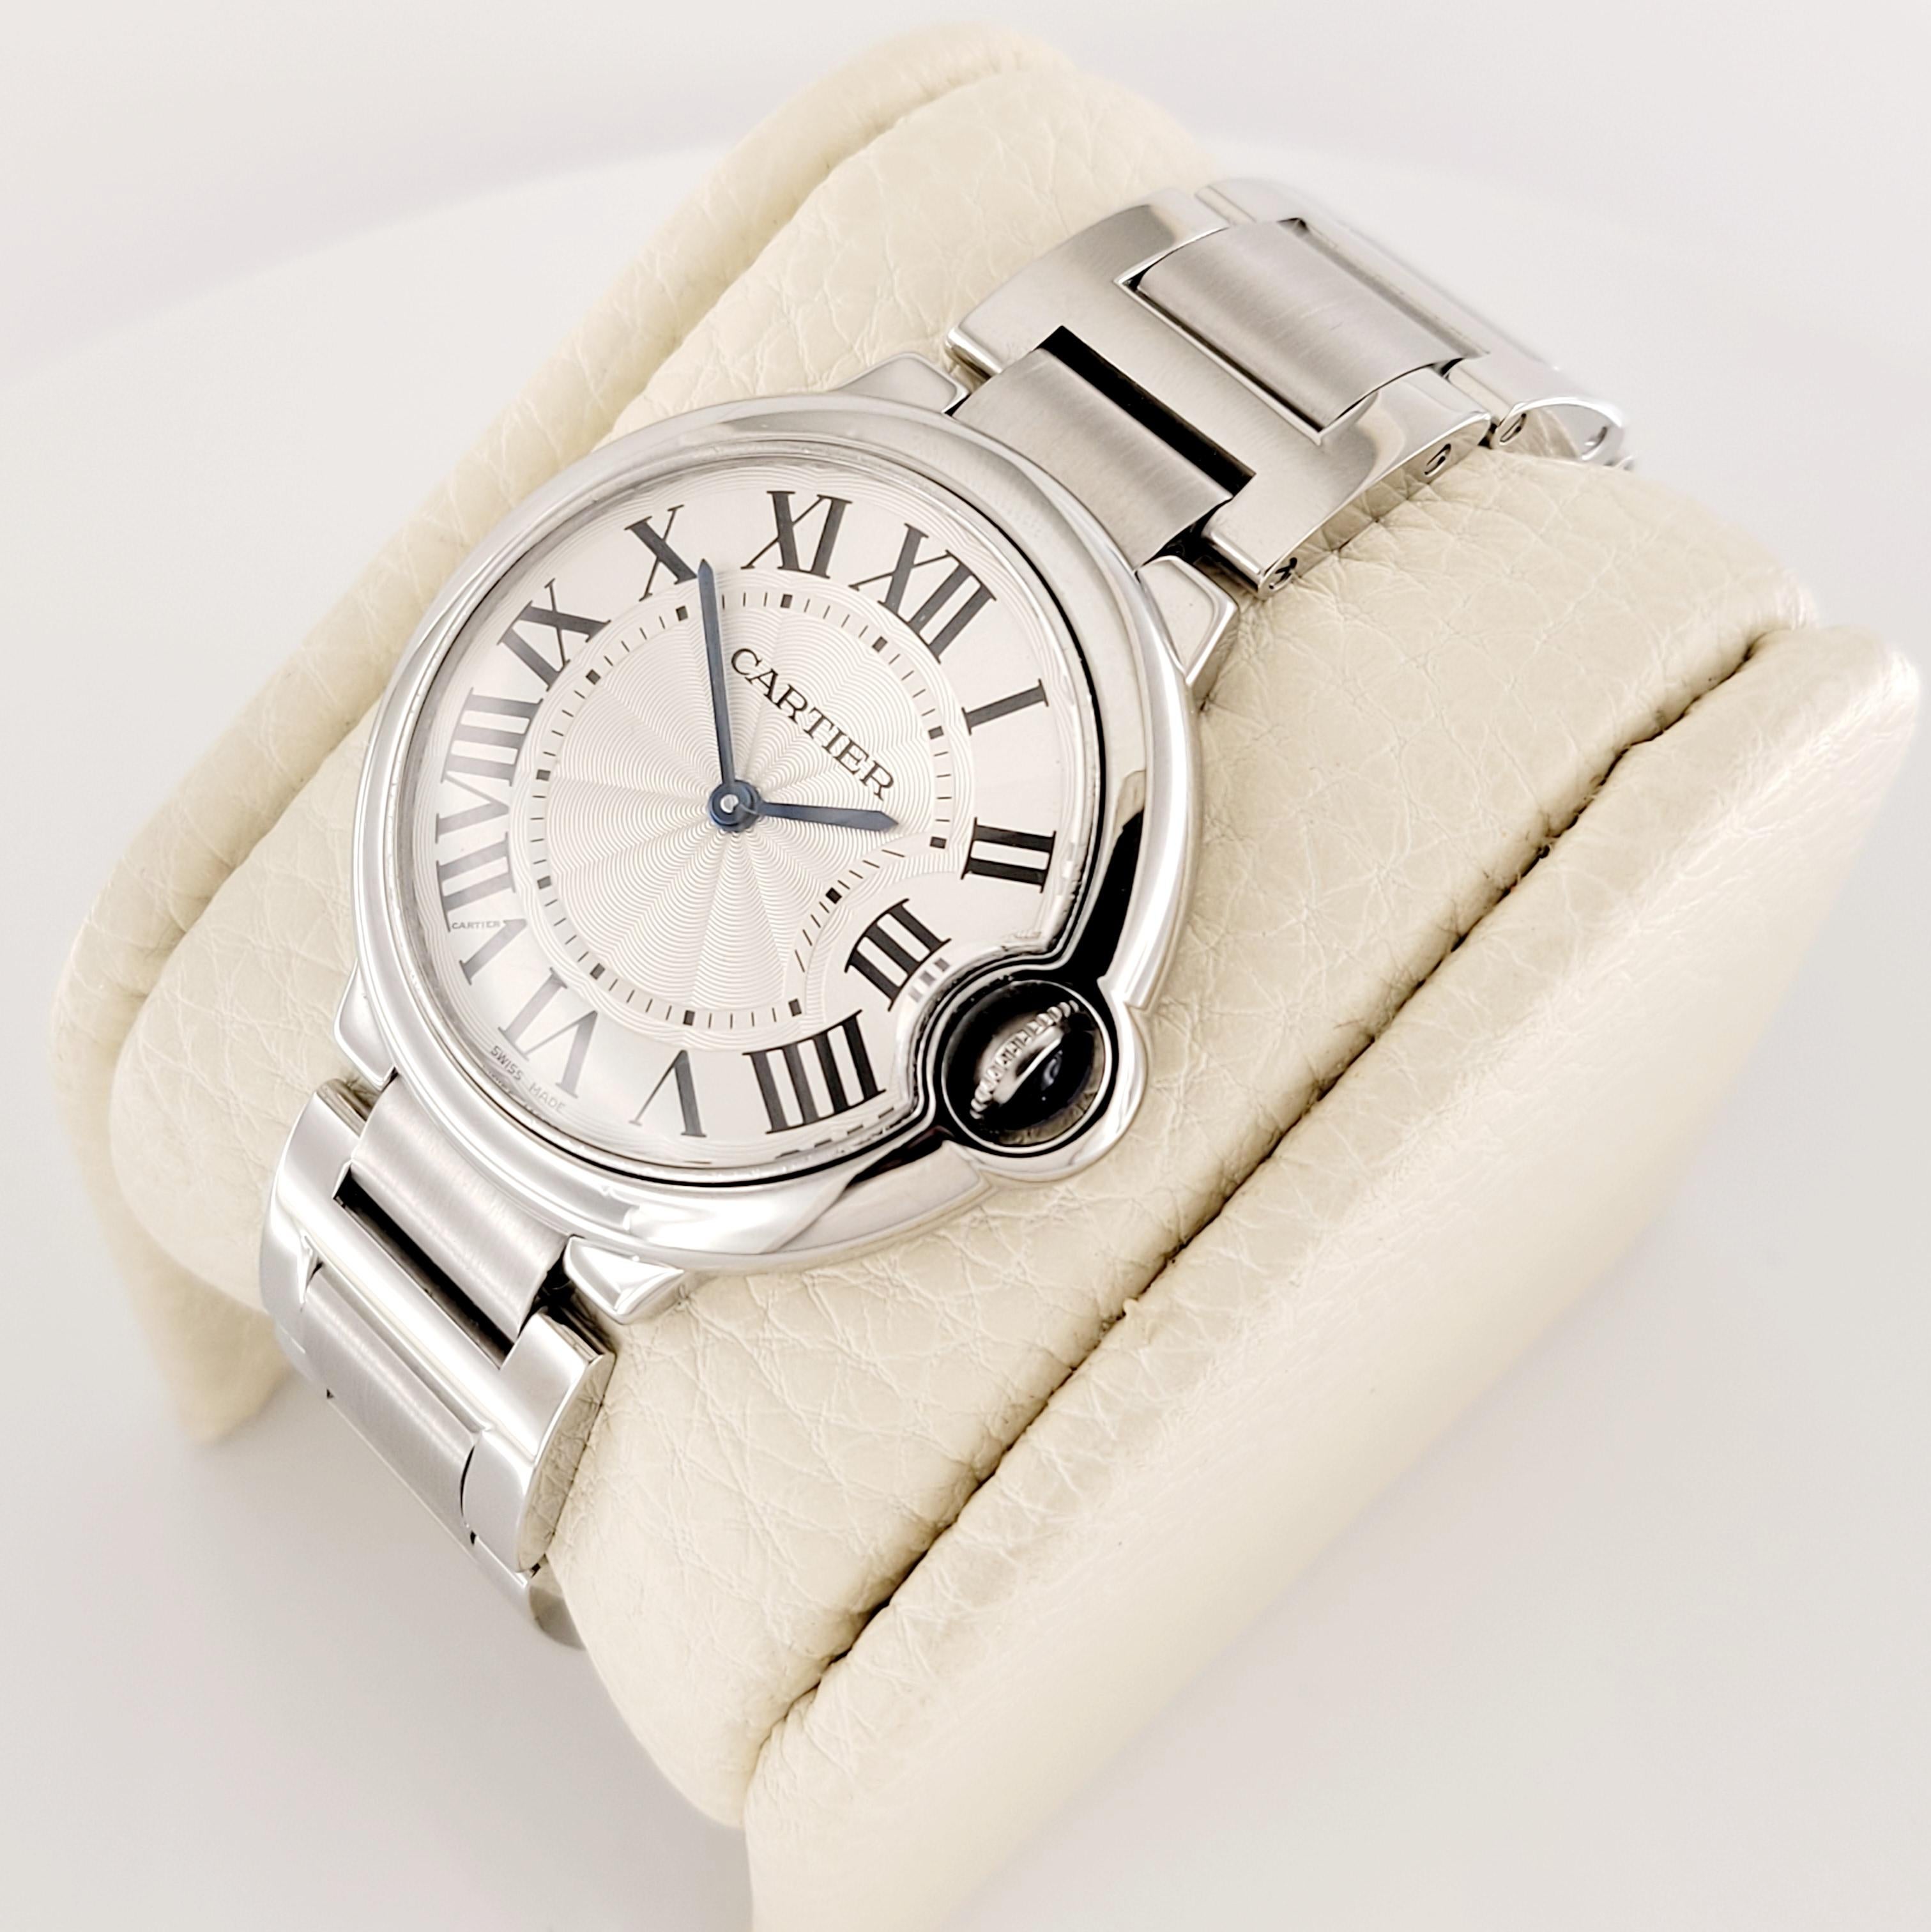 Cartier Ballon Bleu 3005   In Excellent Condition For Sale In New York, NY